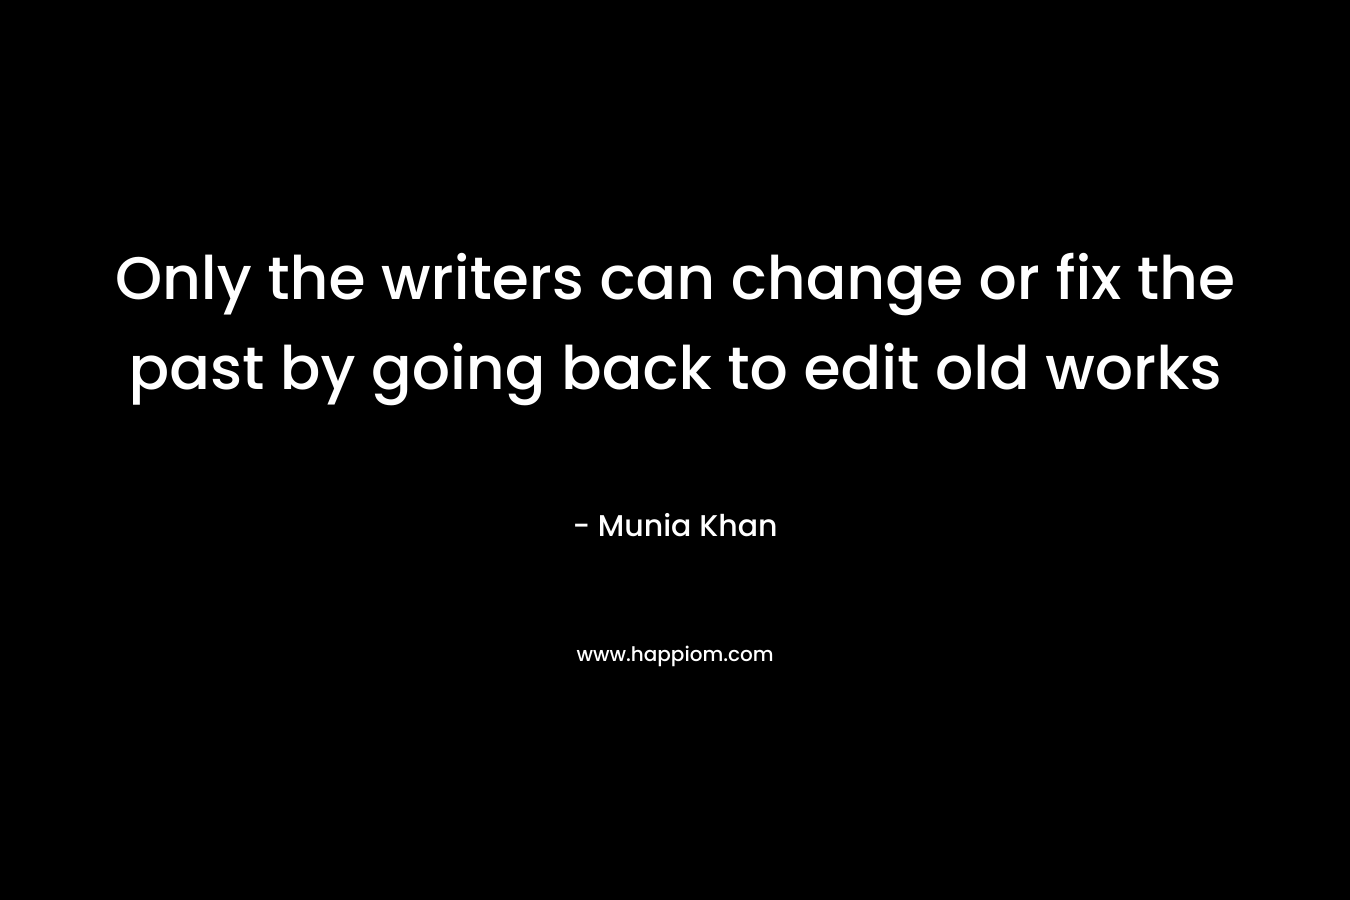 Only the writers can change or fix the past by going back to edit old works